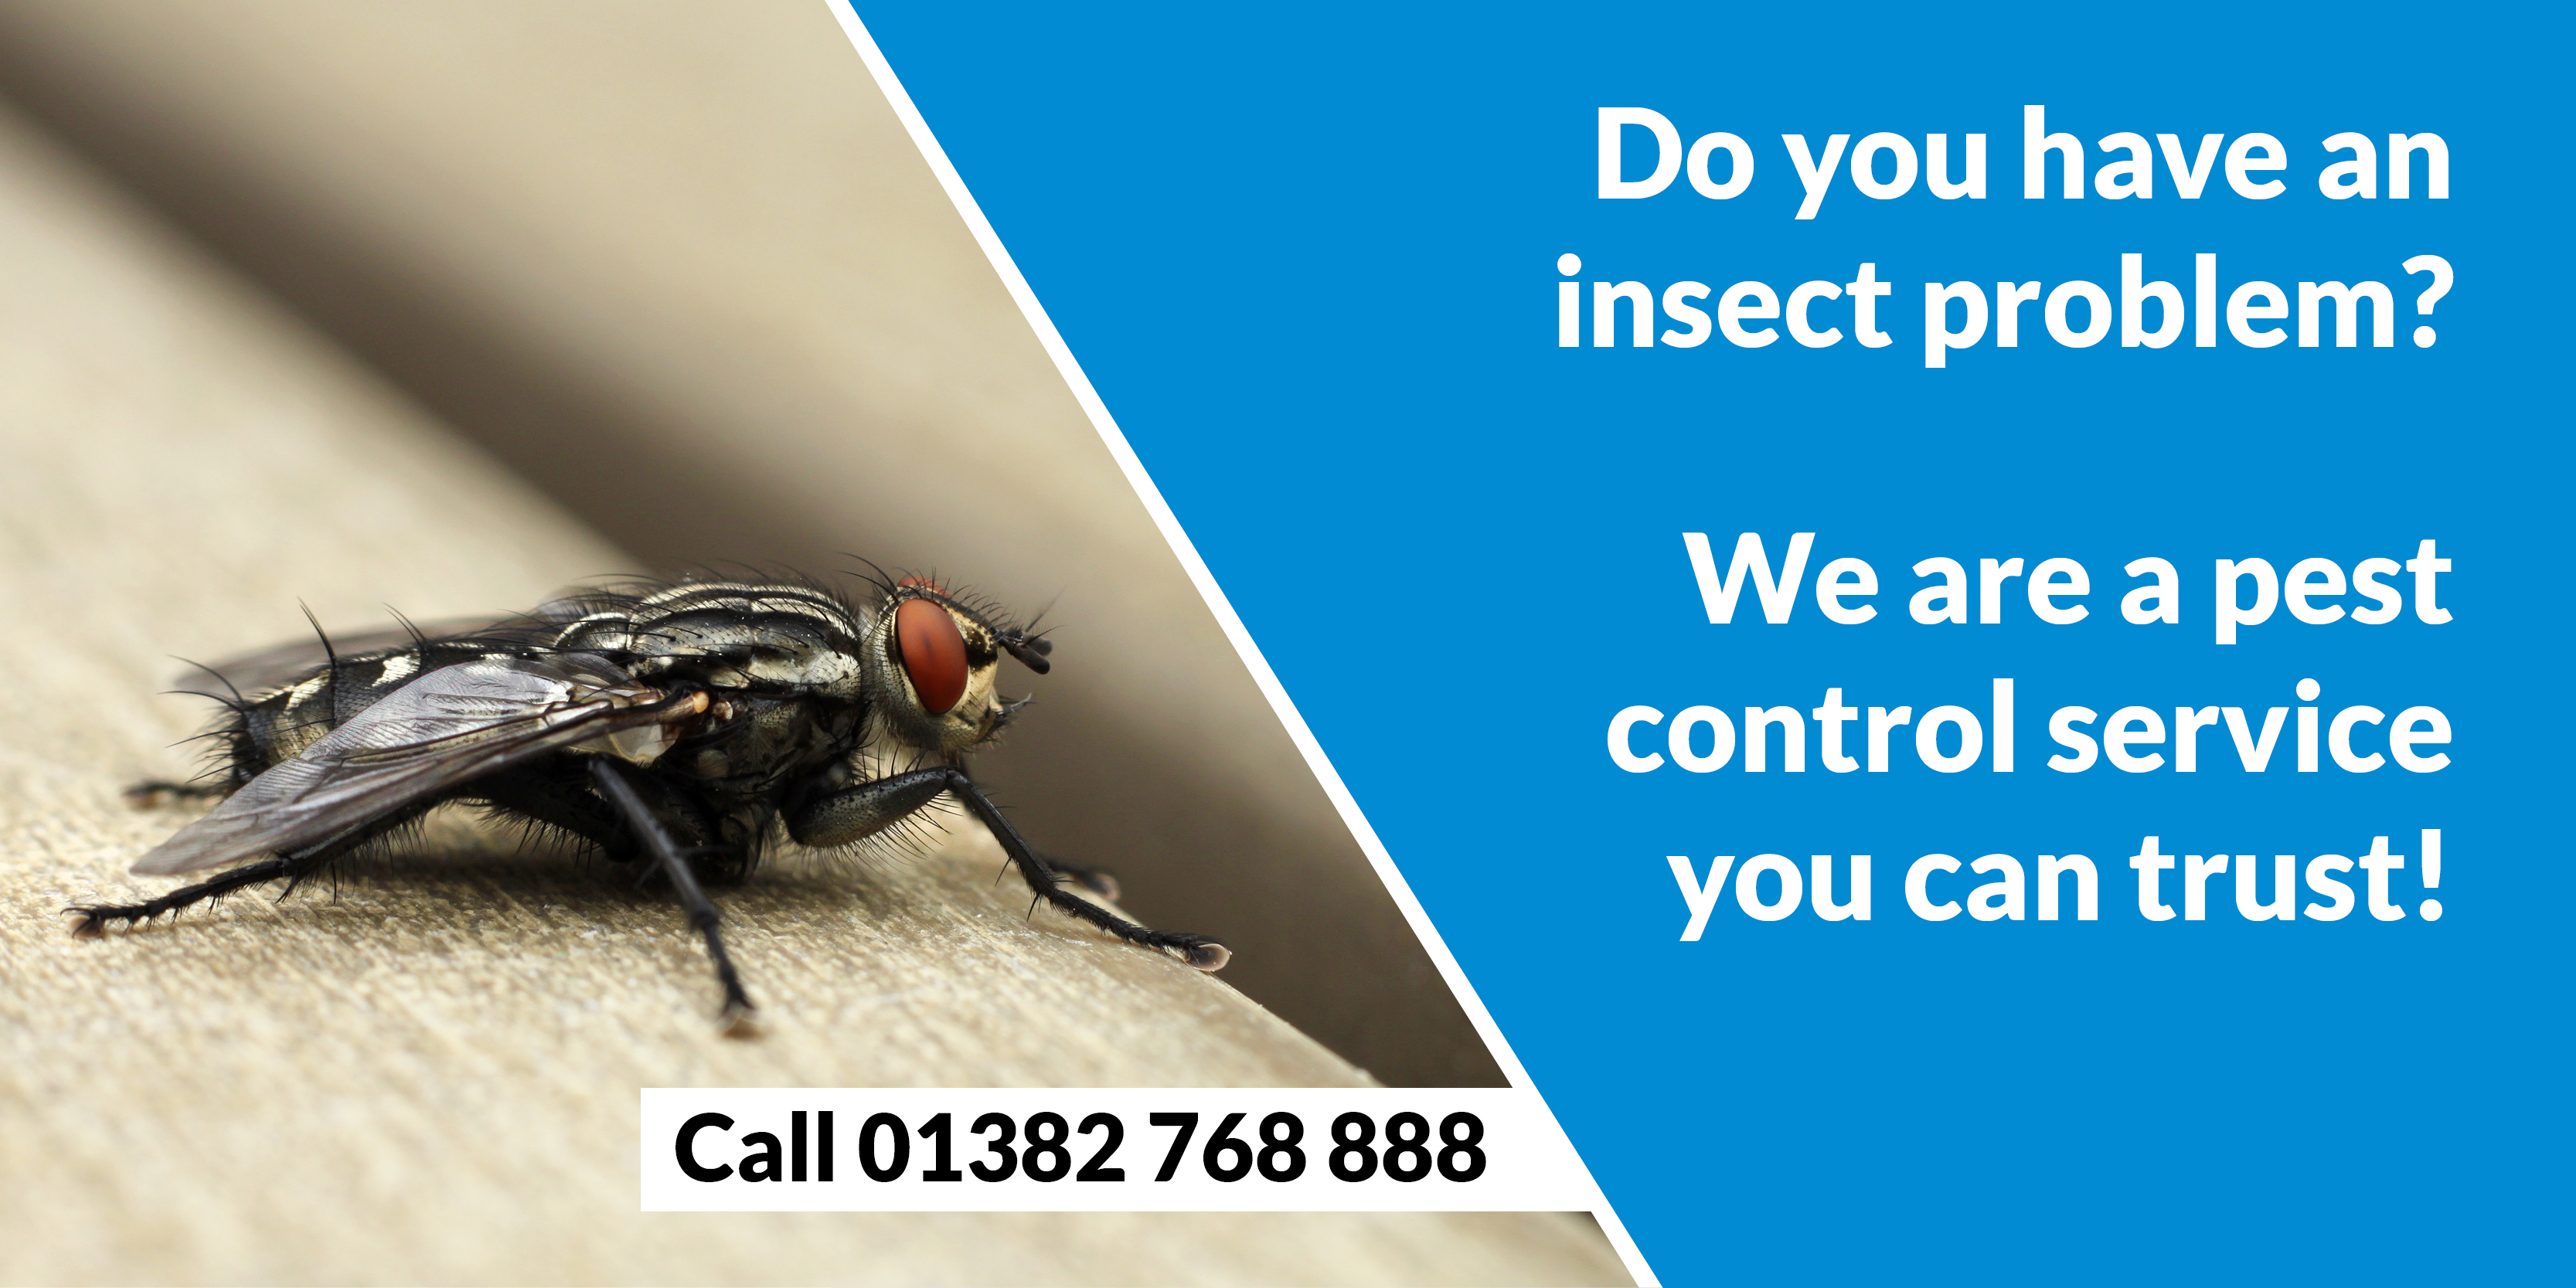 Pest Control Professionals Dundee Pest Solutions - Pest Solutions